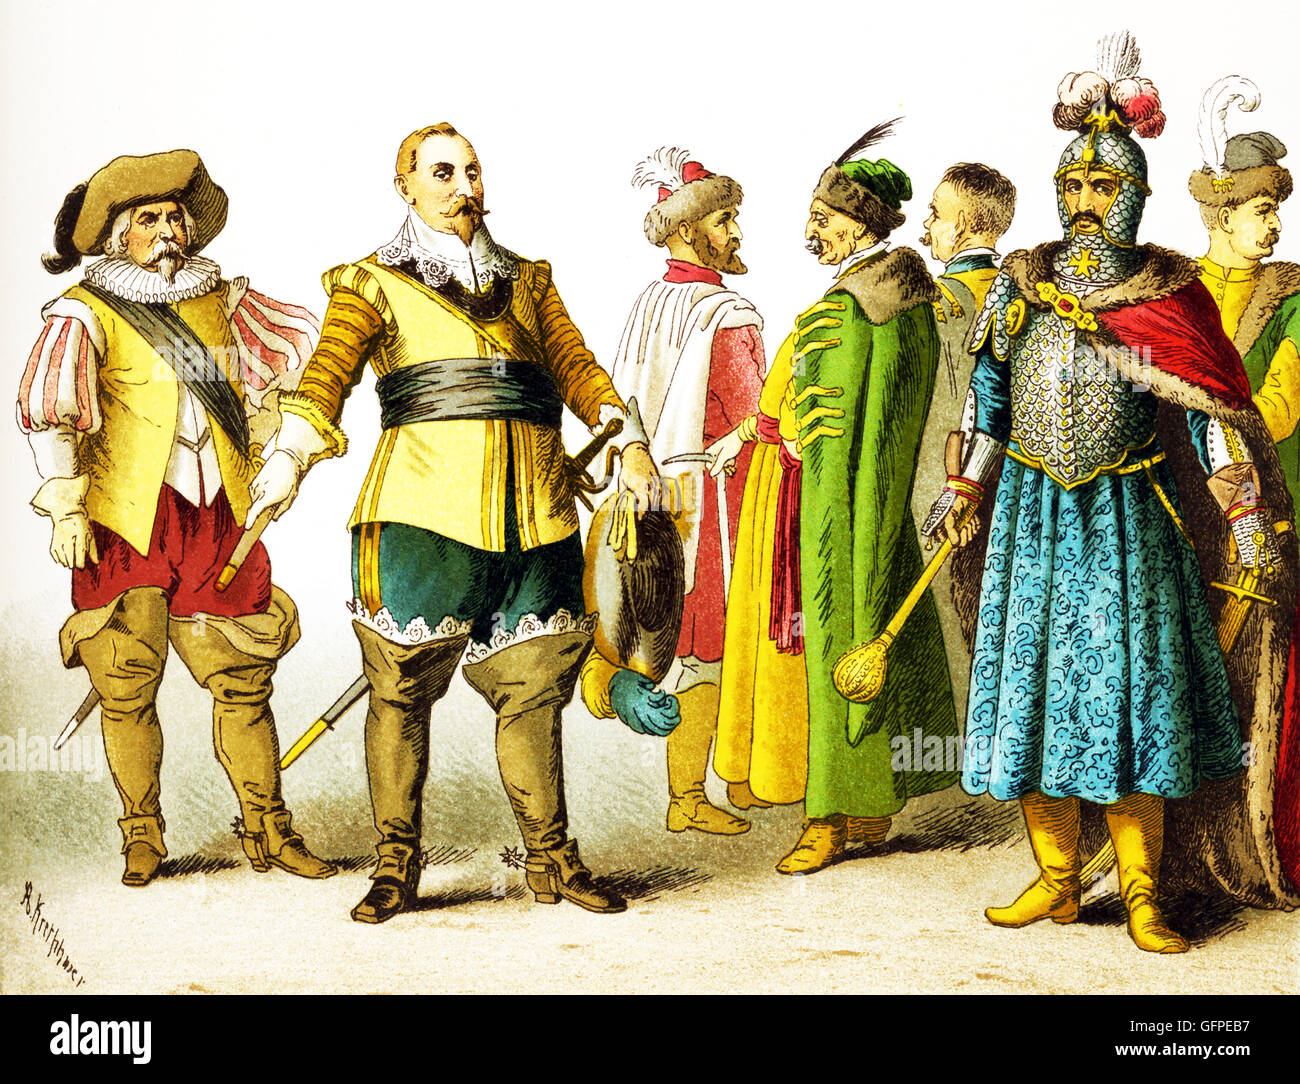 The figures shown here represent, from left to right, are: a Swede, Gustavus Adolphus (died 1632), three Poles, King John Sobiesky, and a Pole. The clothes, attire, and names all date to the 1600s.The illustration dates to 1882. Stock Photo